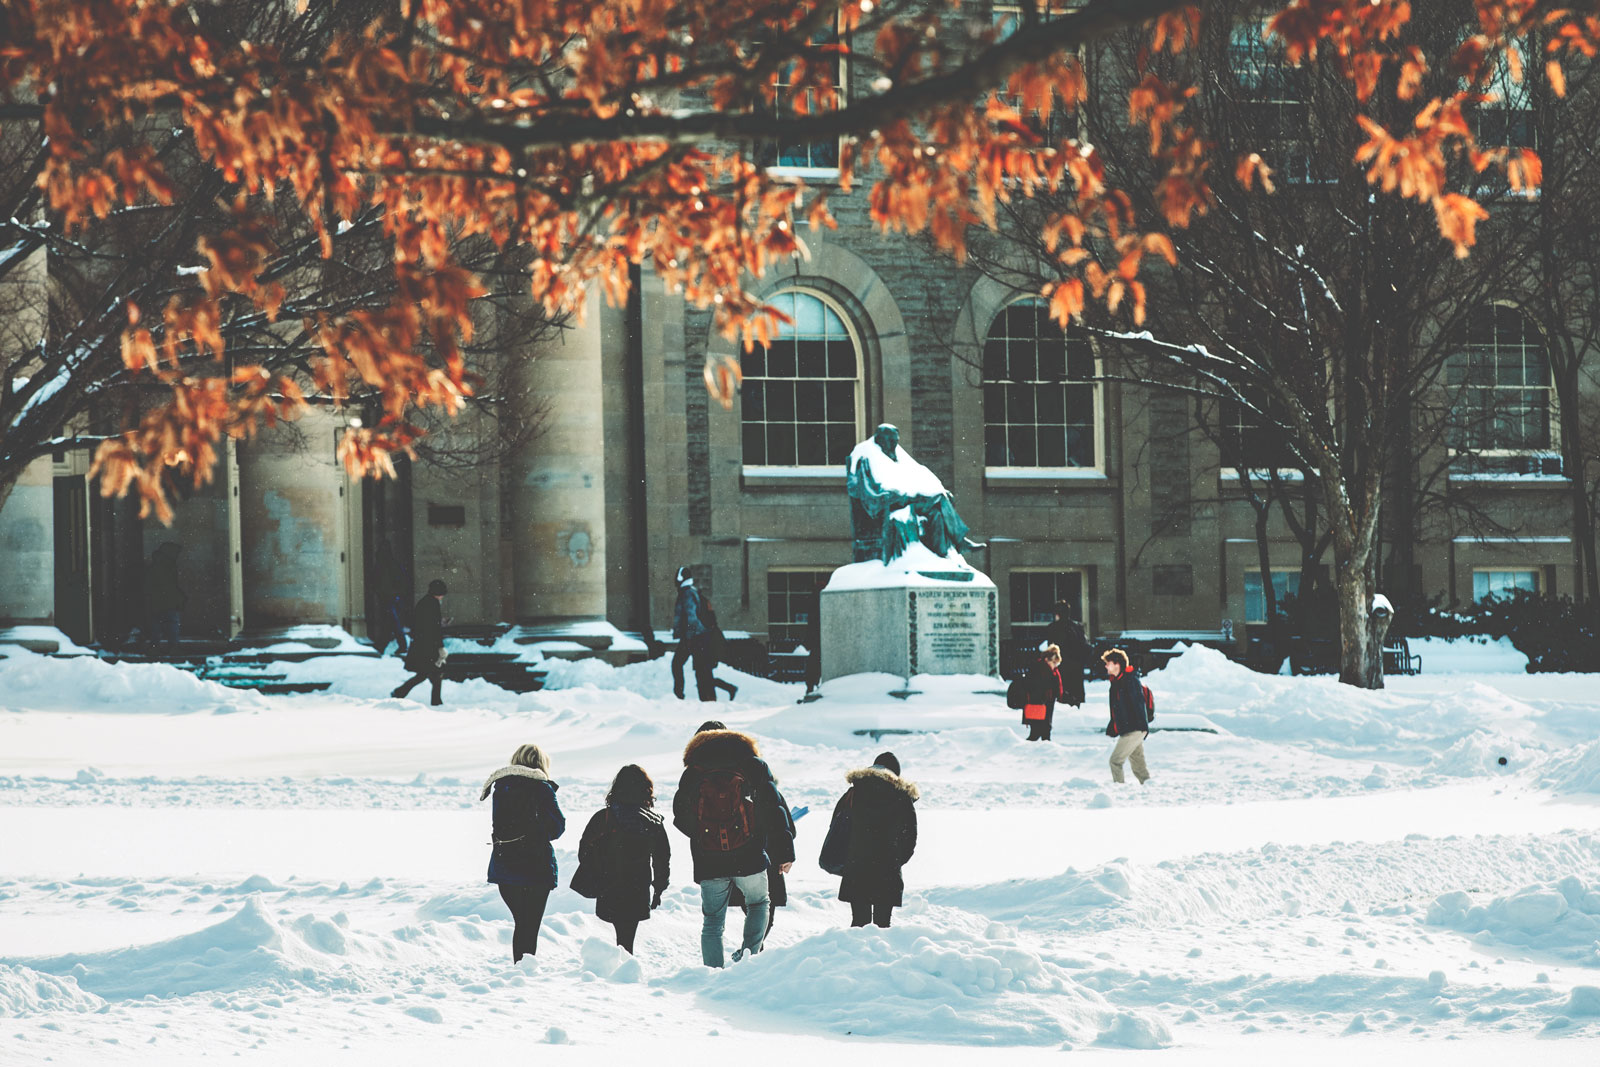 Tale as old as time: Students walk to class in the snow